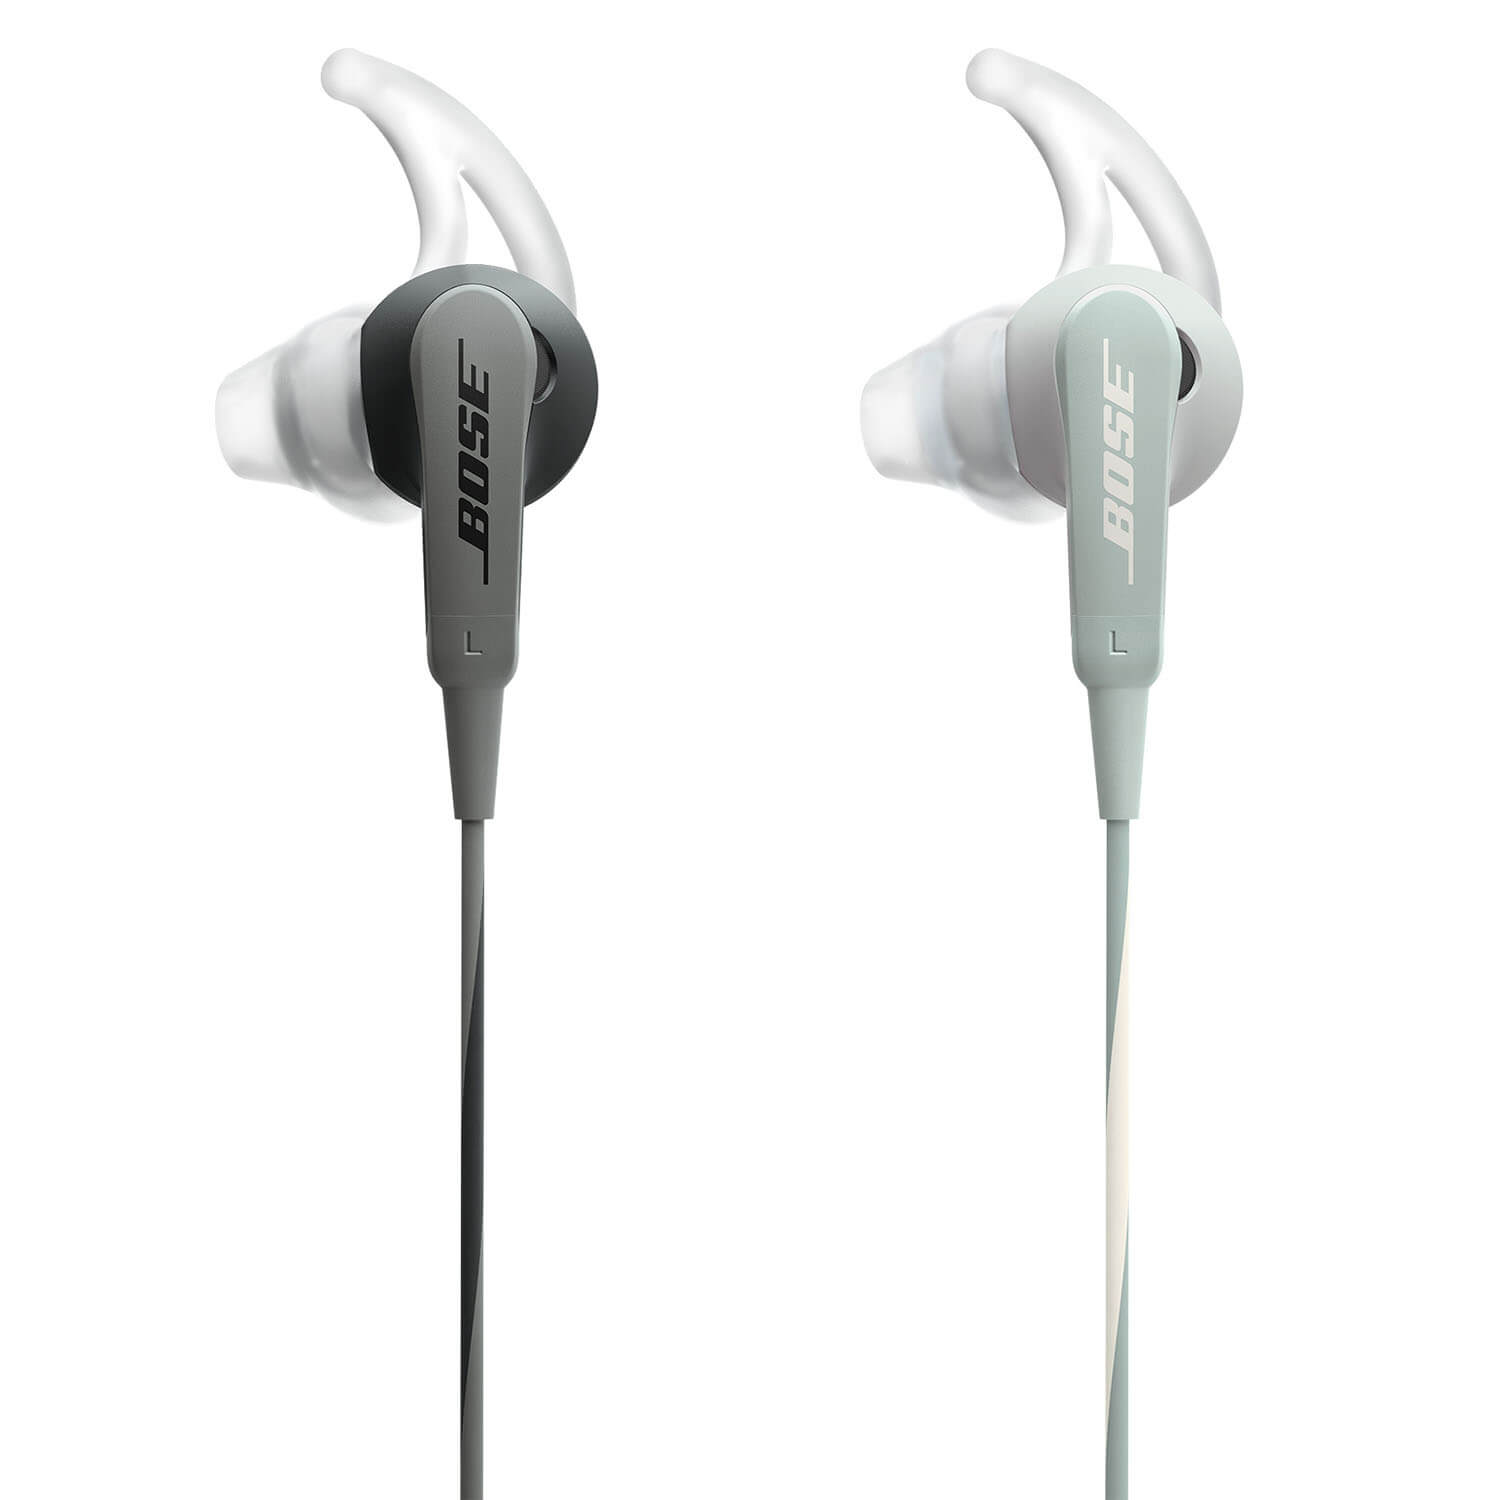 Bose In Ear Headphones Are Top Of The Line Visit Our Miami Showroom!